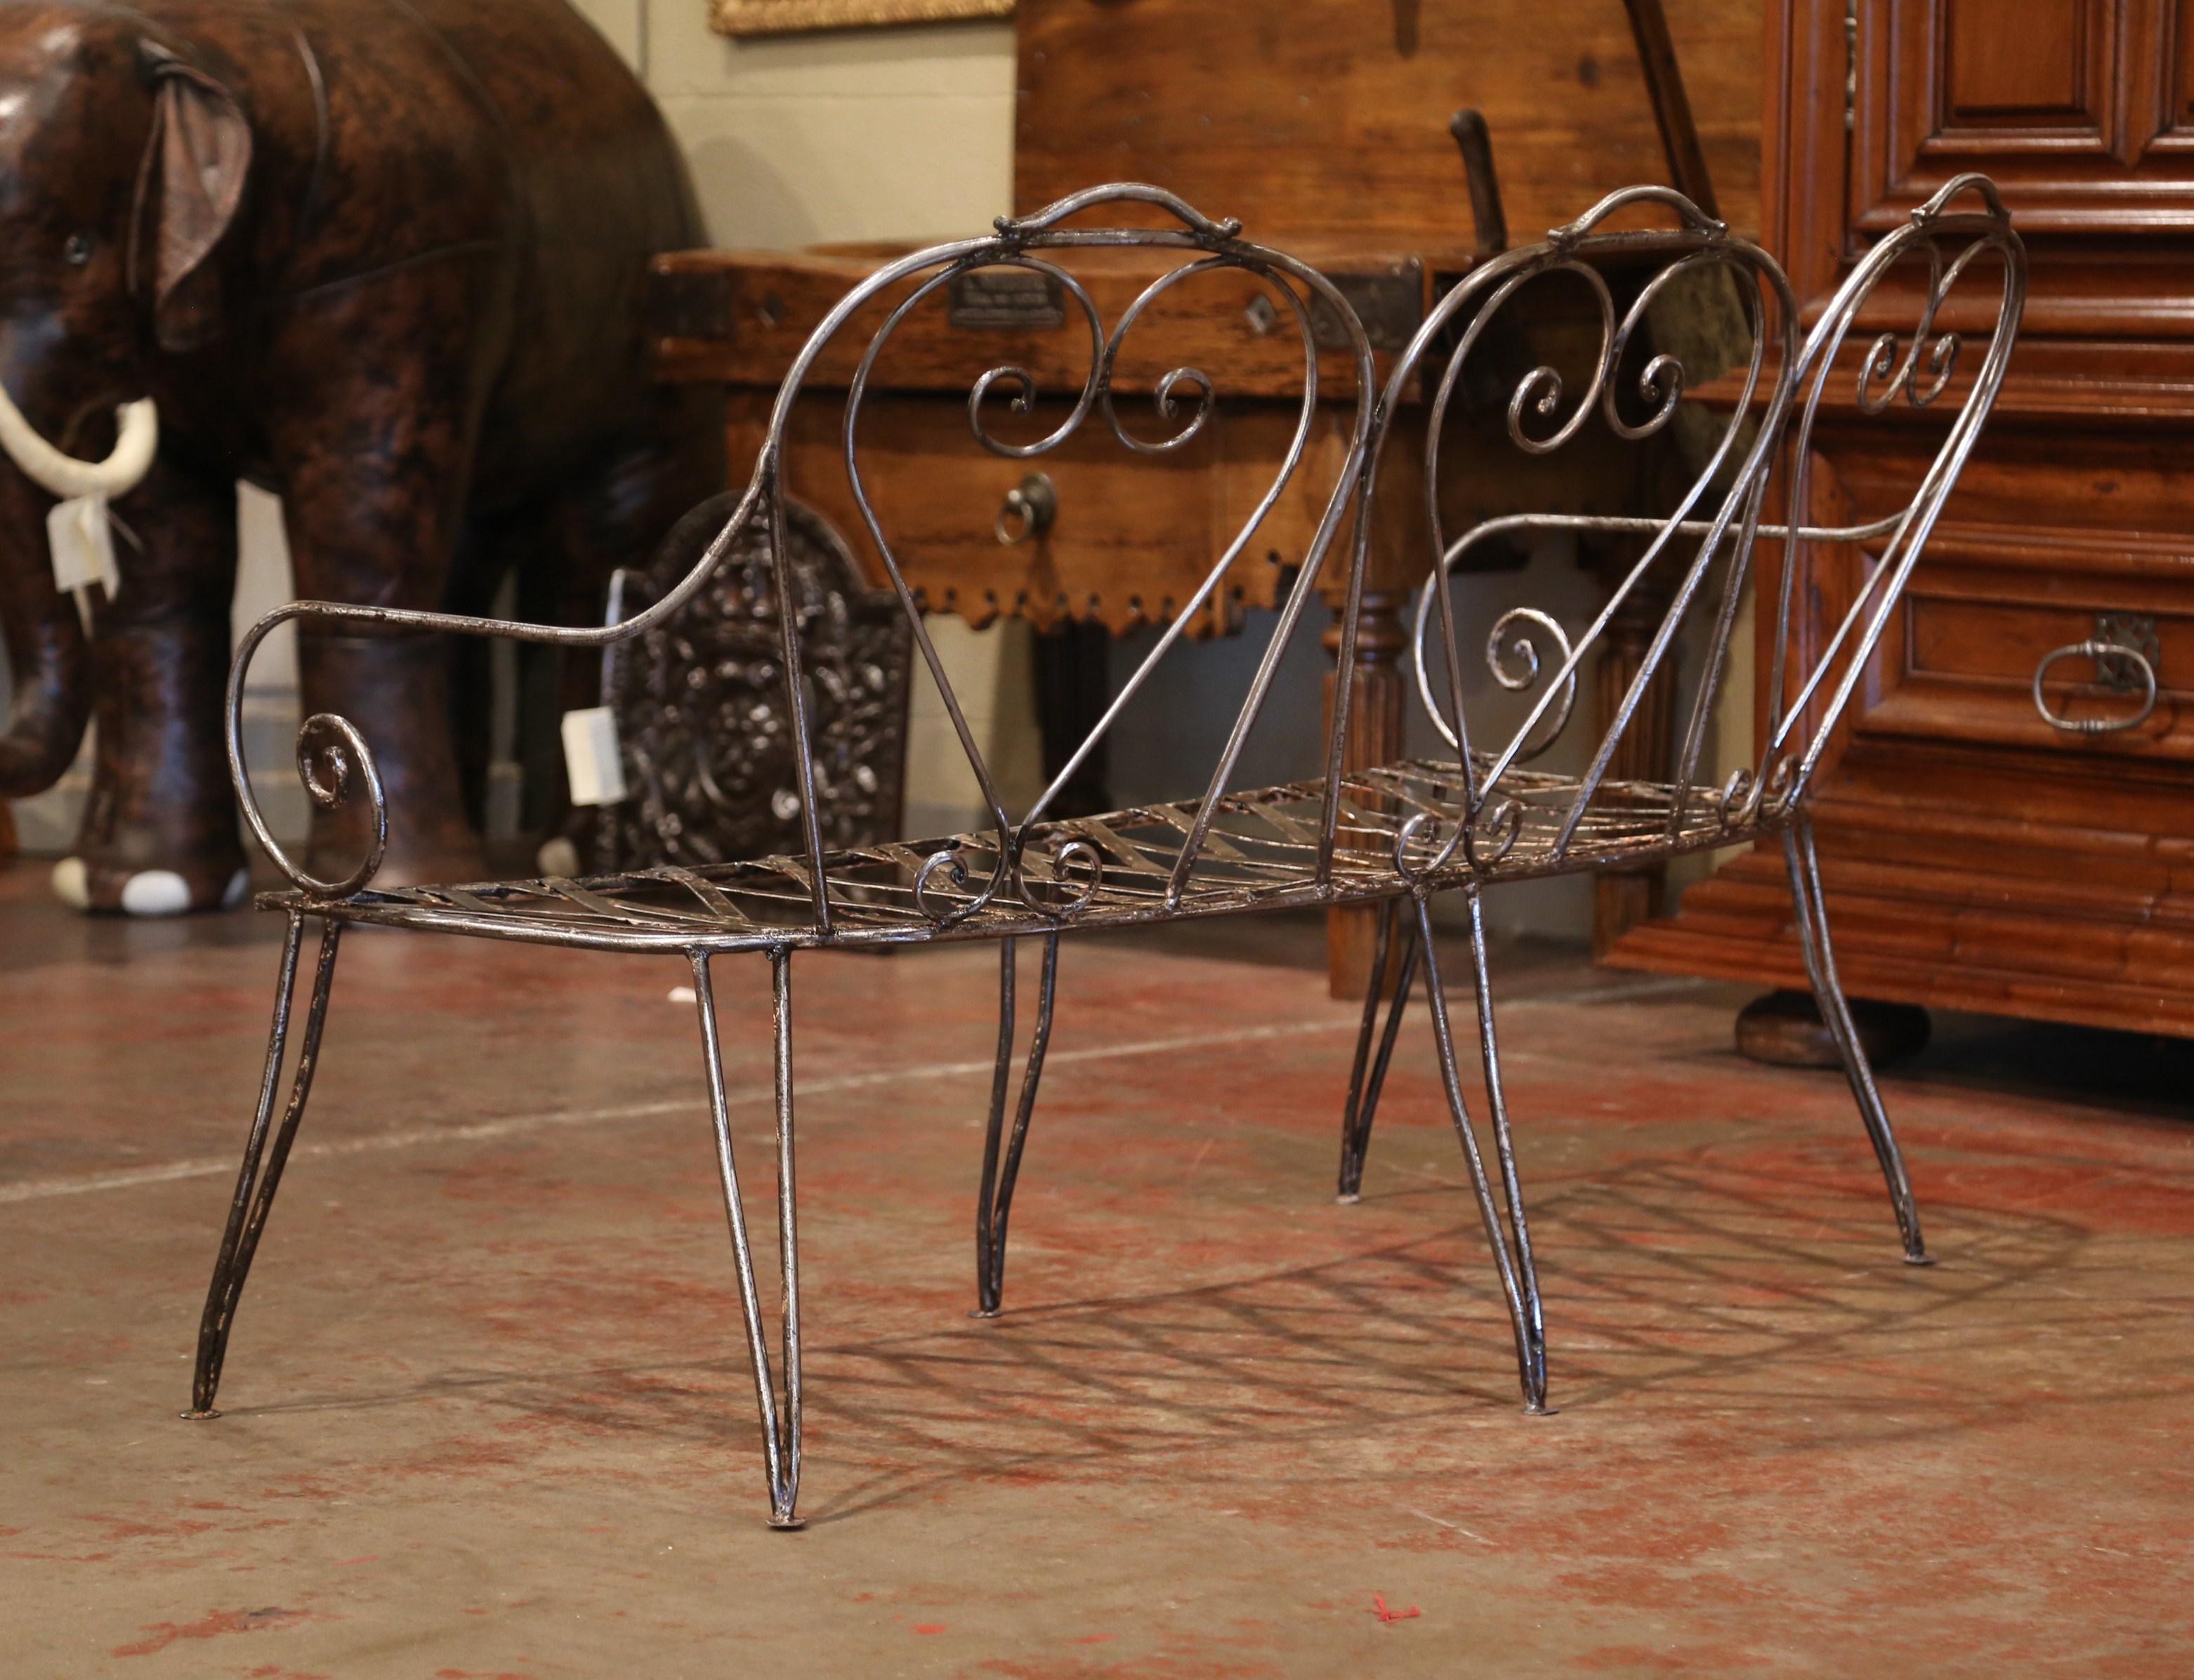 19th Century French Curved Polished Iron Three-Seat Garden Bench from Normandy For Sale 2